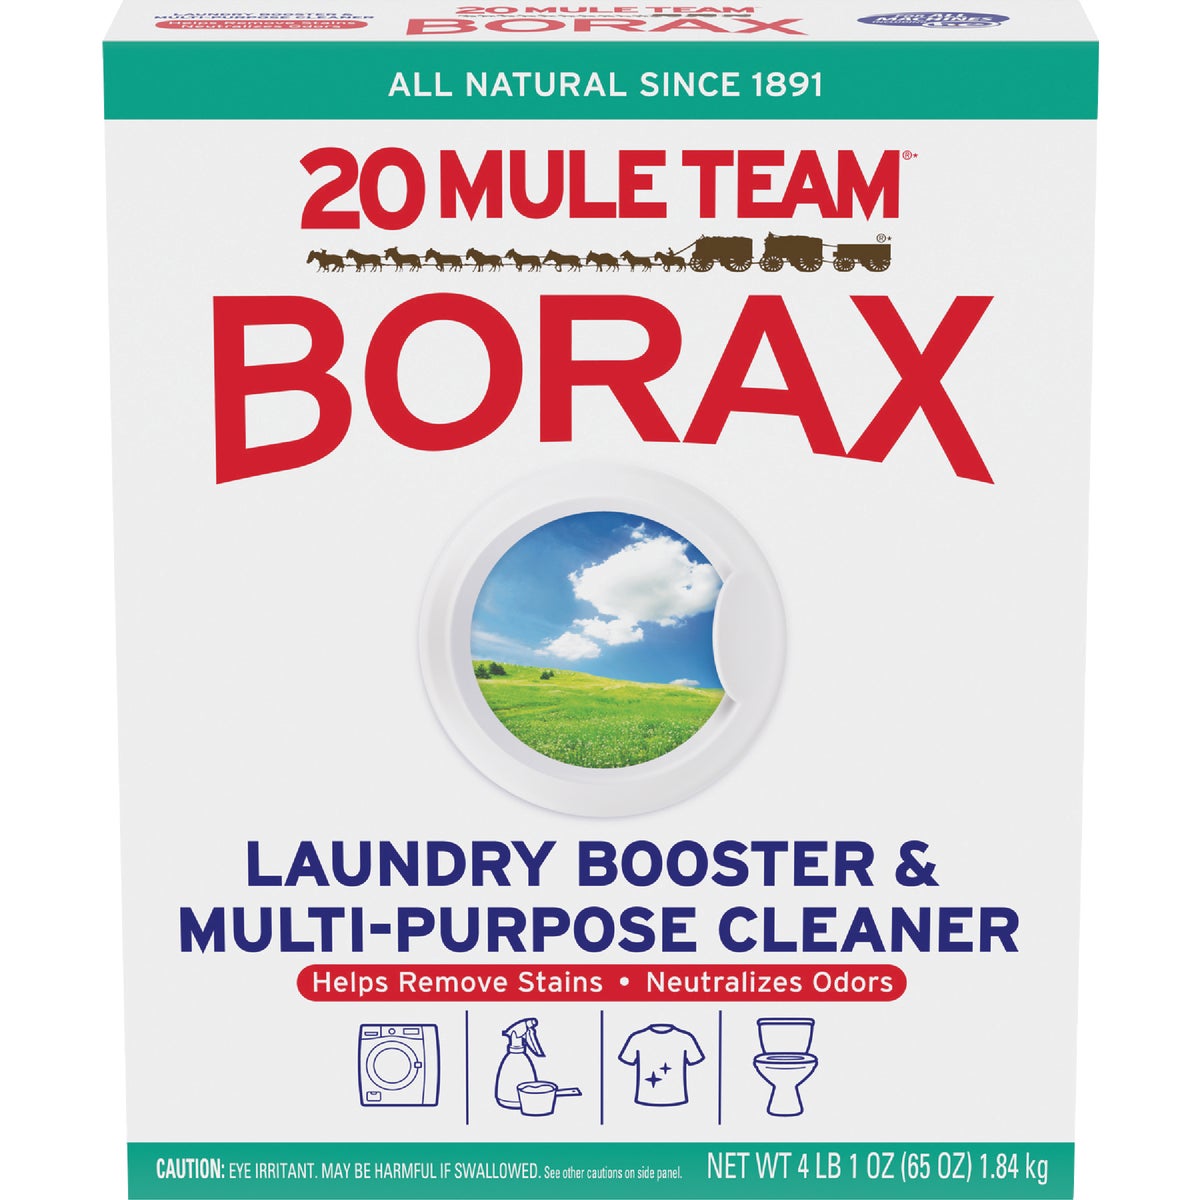 Item 627977, Natural laundry booster and multi-purpose cleaner.